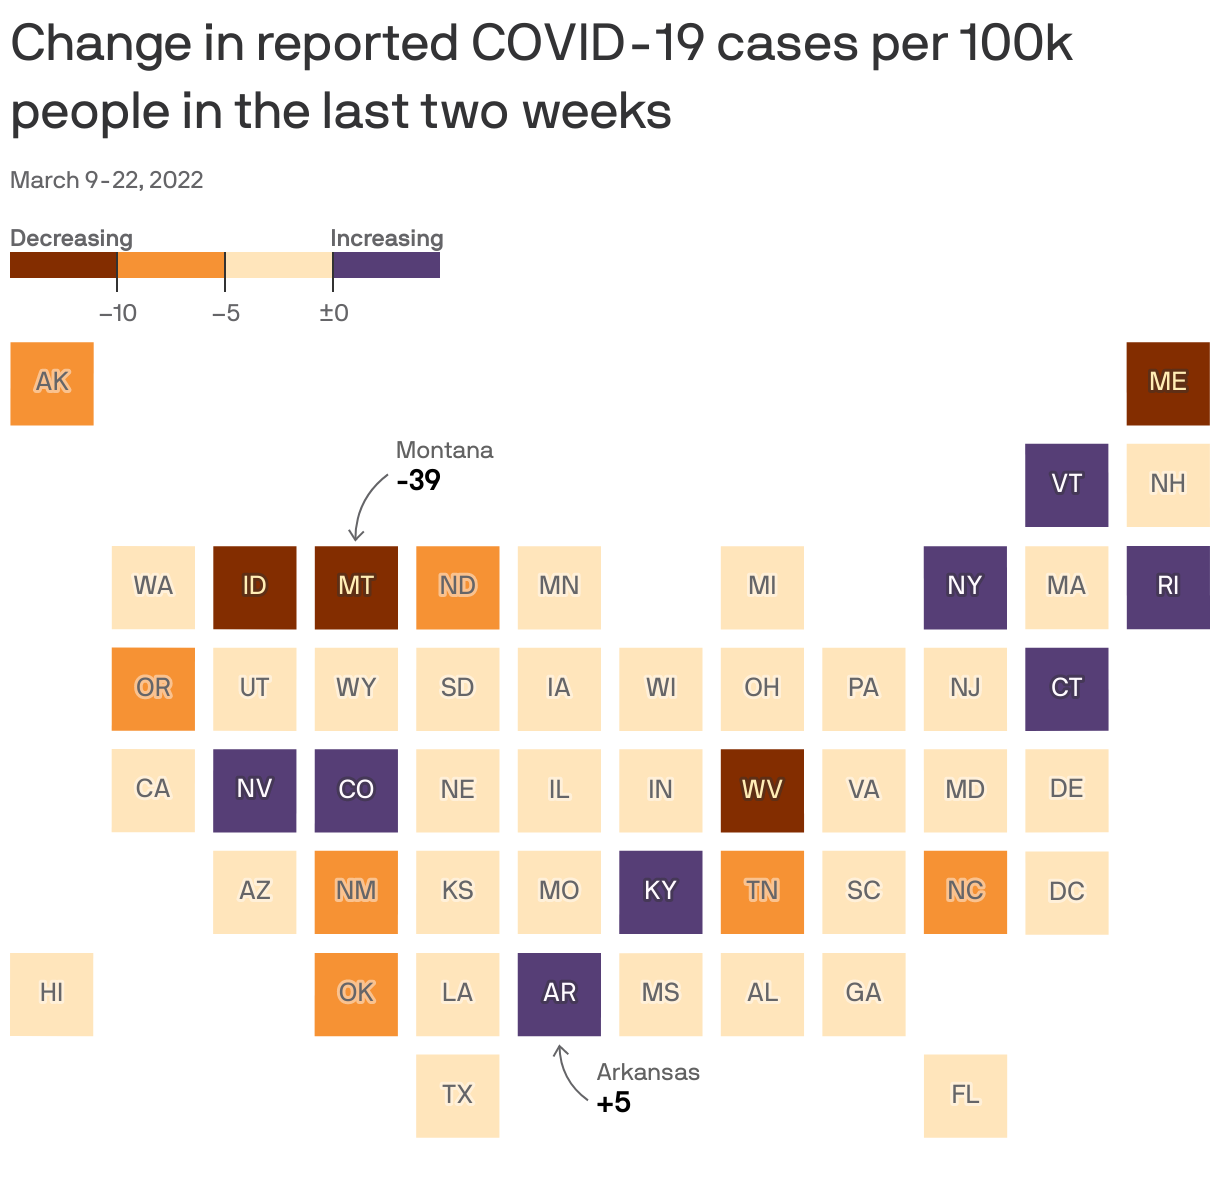 Change in reported COVID-19 cases per 100k people in the last two weeks